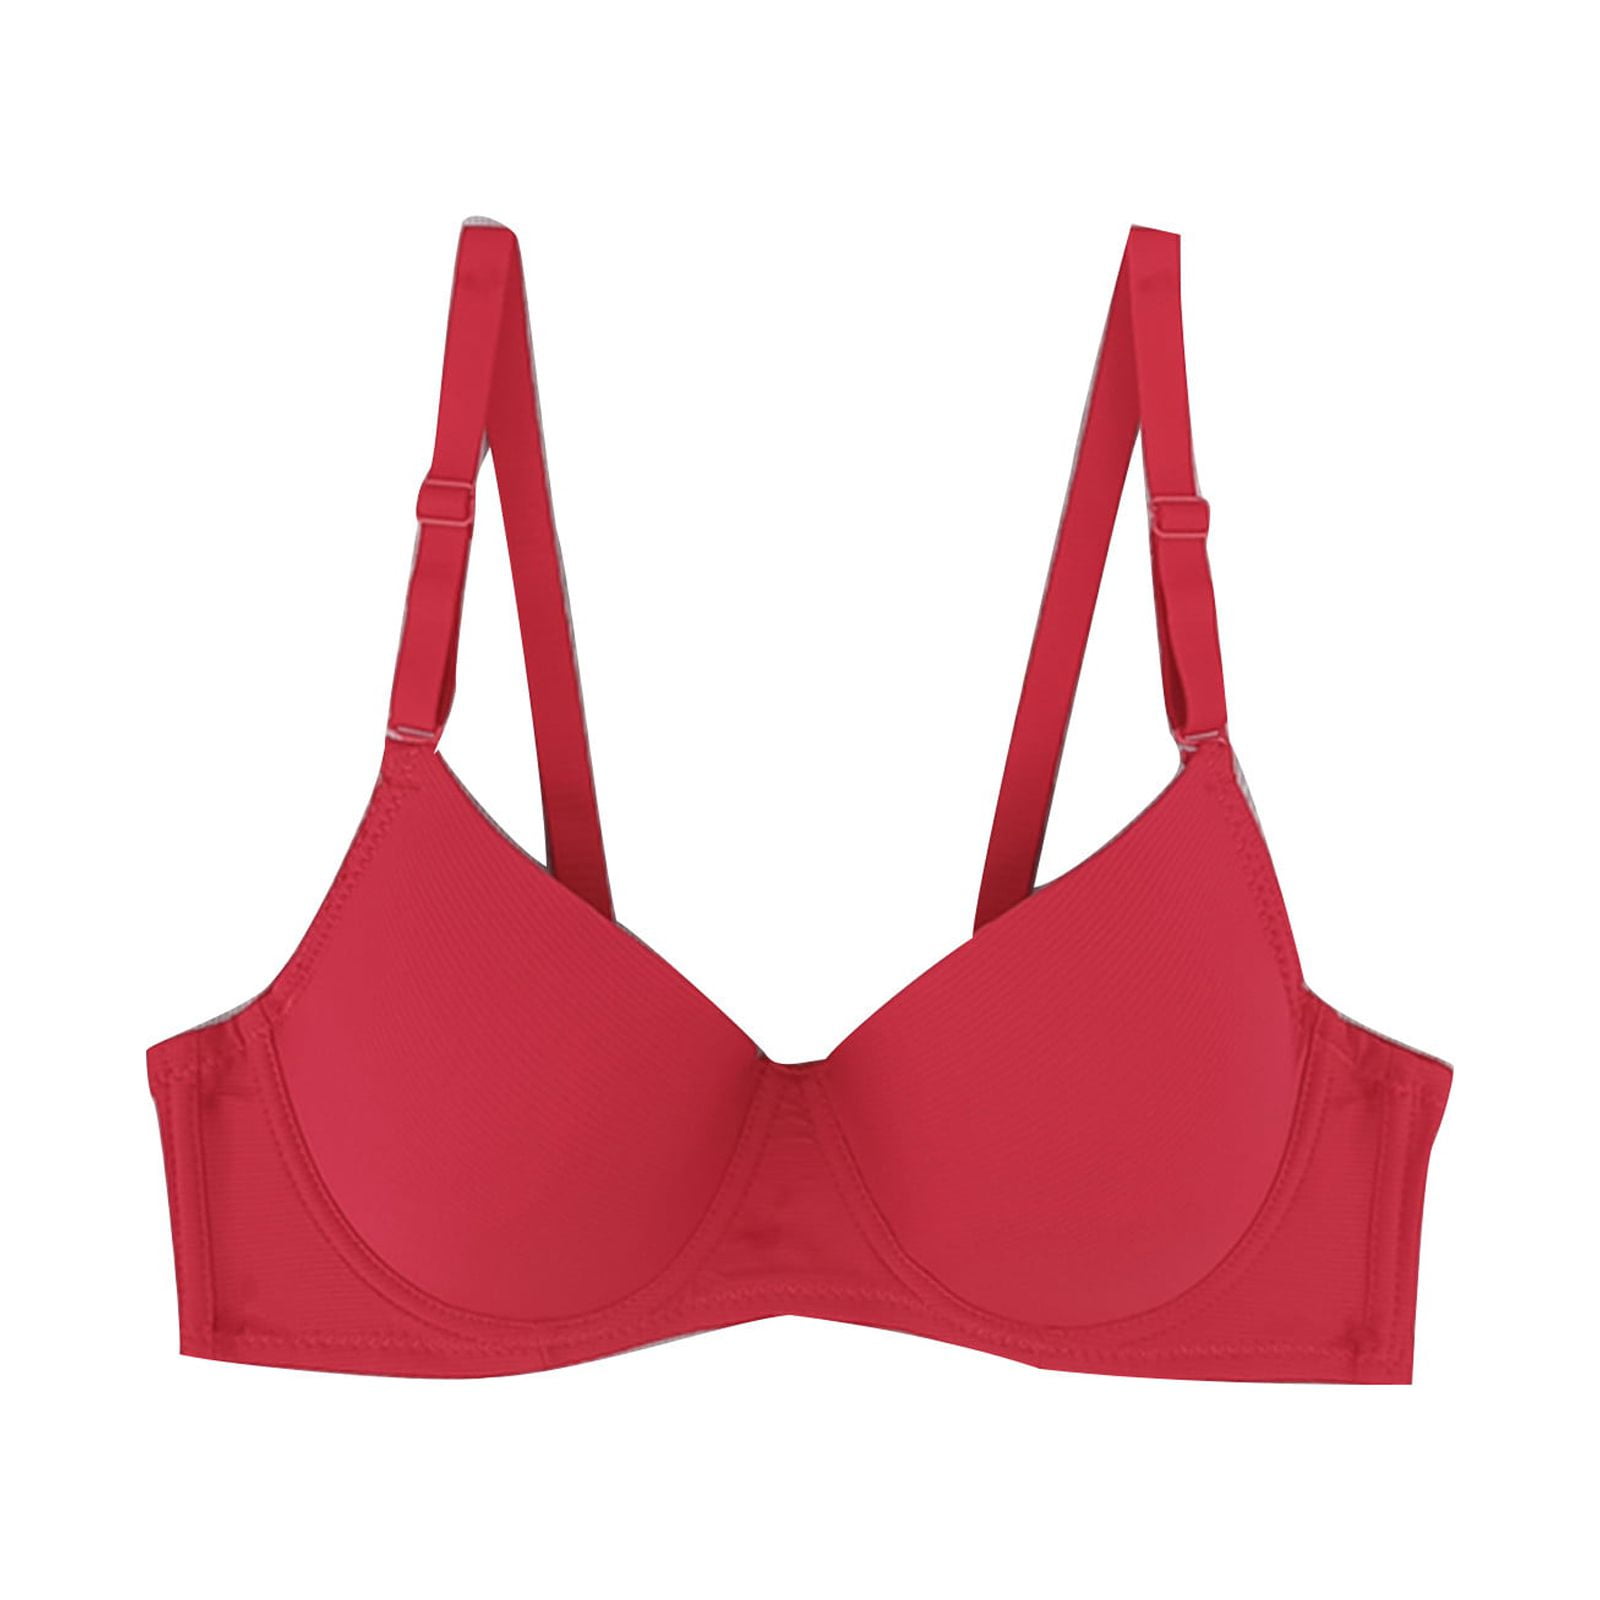 Nude Sports Bra, Women Solid Underwear Sexy Small Breasts Push Up